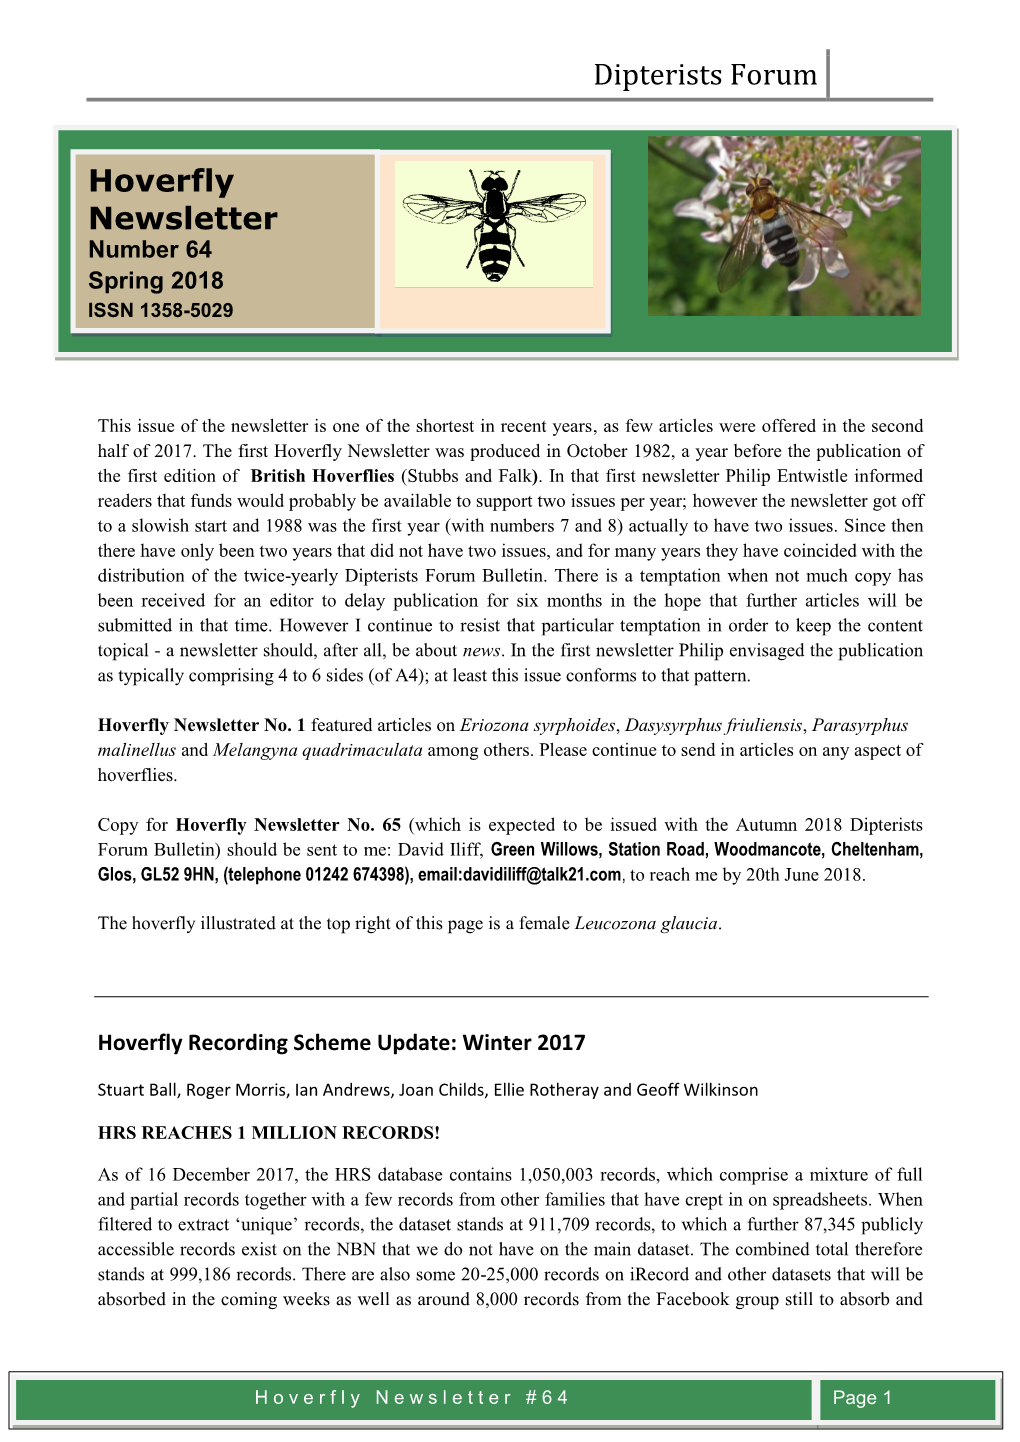 Hoverfly Newsletter Was Produced in October 1982, a Year Before the Publication of the First Edition of British Hoverflies (Stubbs and Falk)